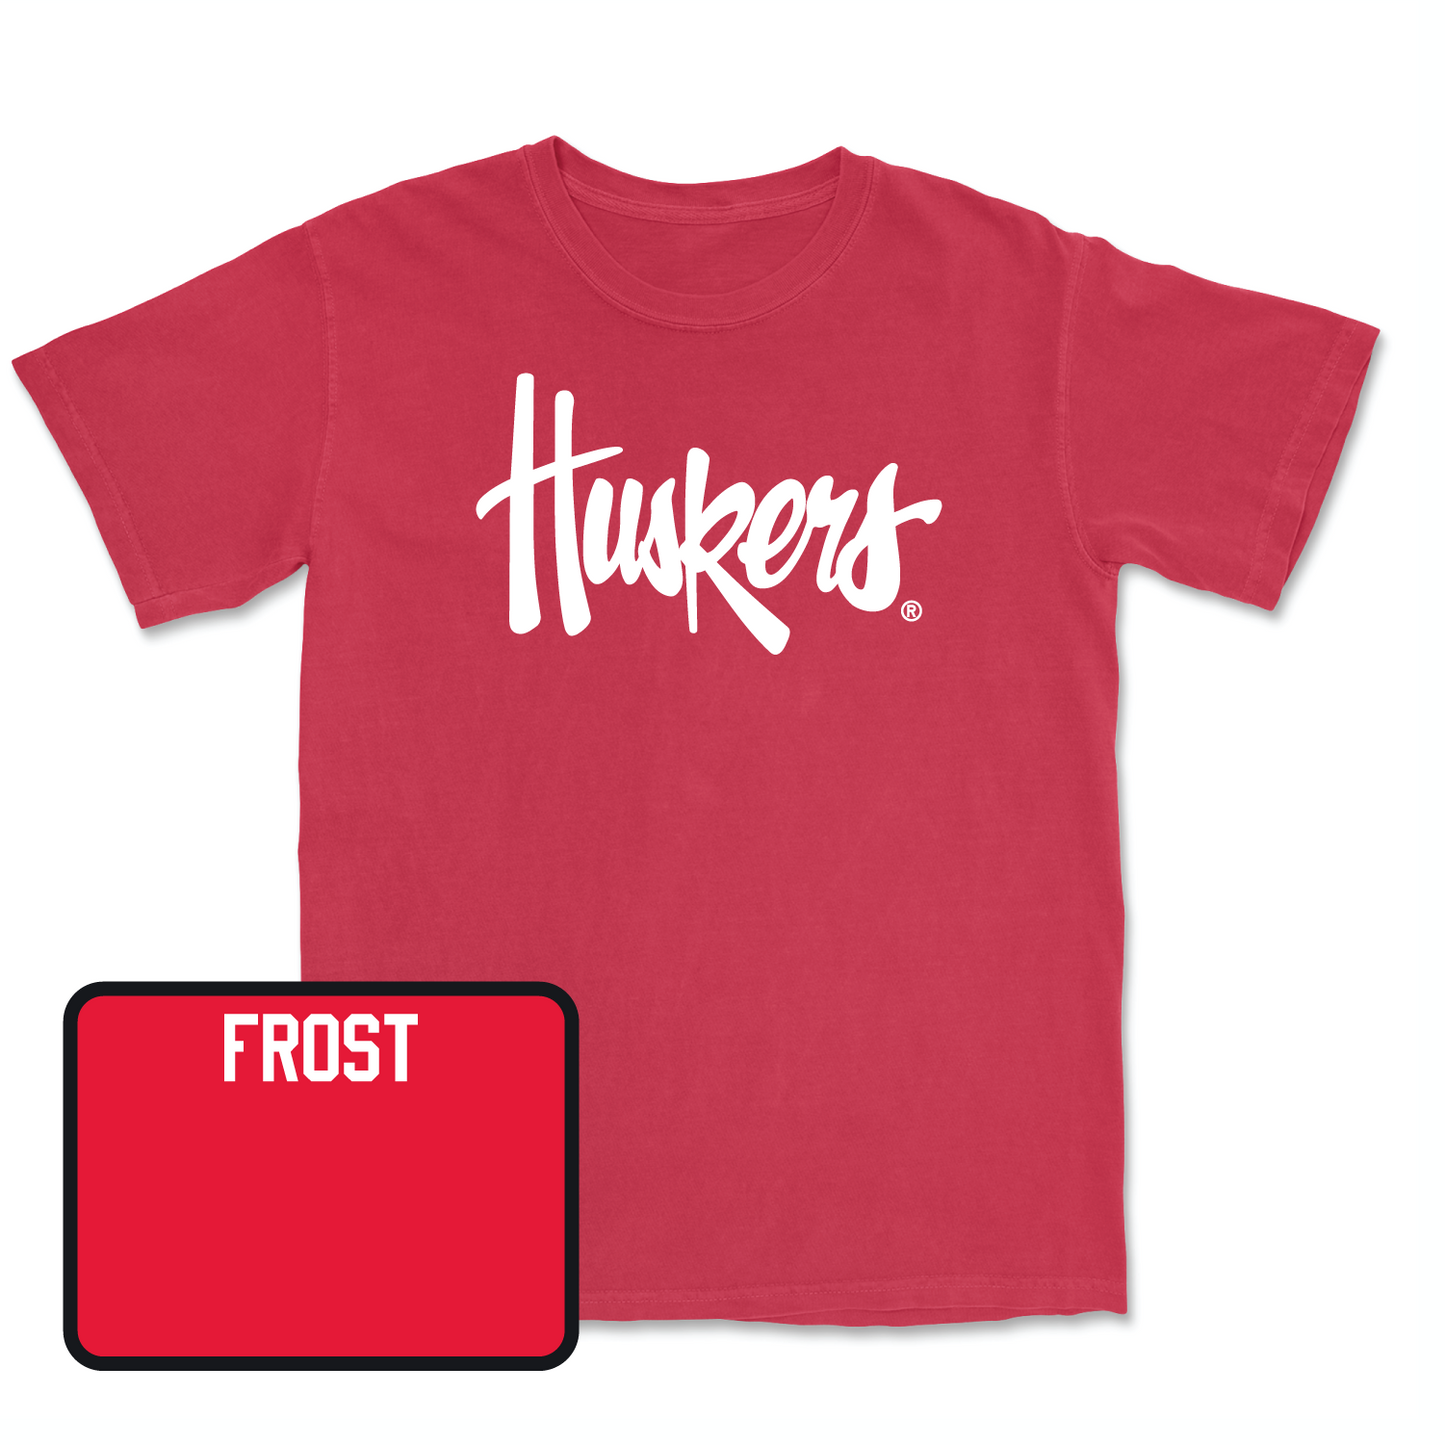 Red Women's Gymnastics Huskers Tee Youth Medium / Emalee Frost